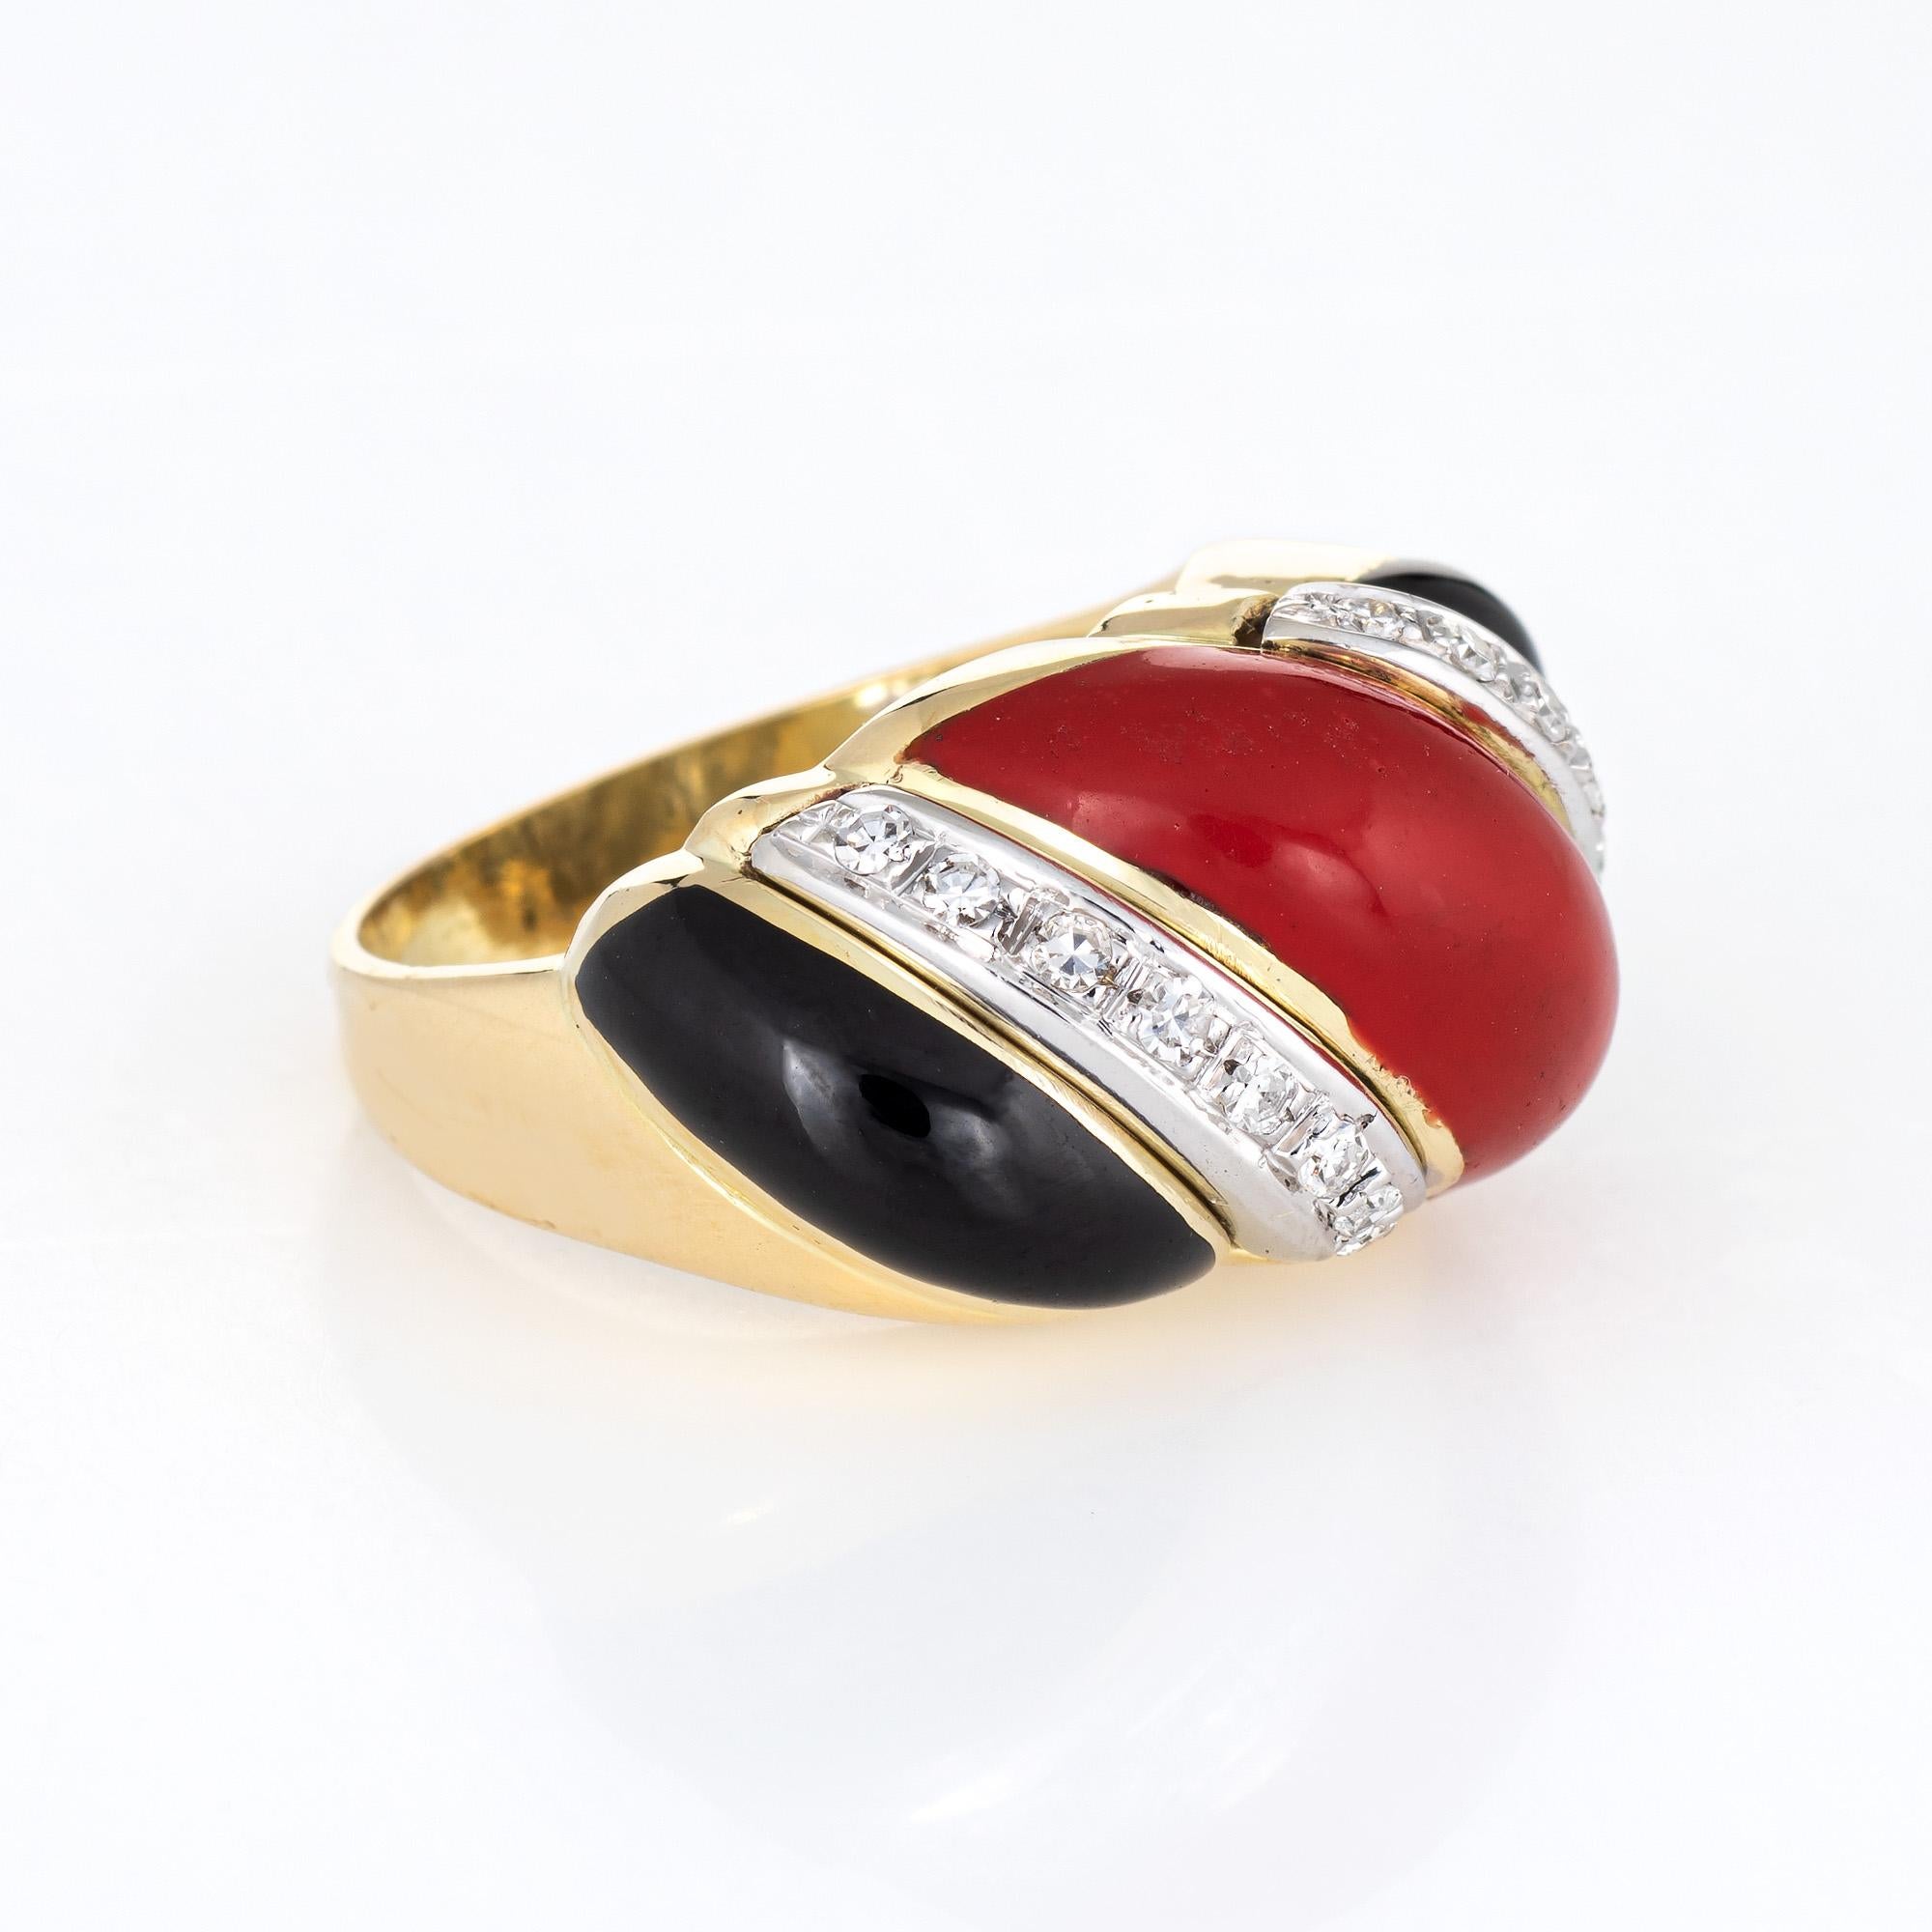 Modern Red Coral Onyx Diamond Ring Vintage 14k Yellow Gold Scrolled Band Jewelry Sz 5.5 For Sale